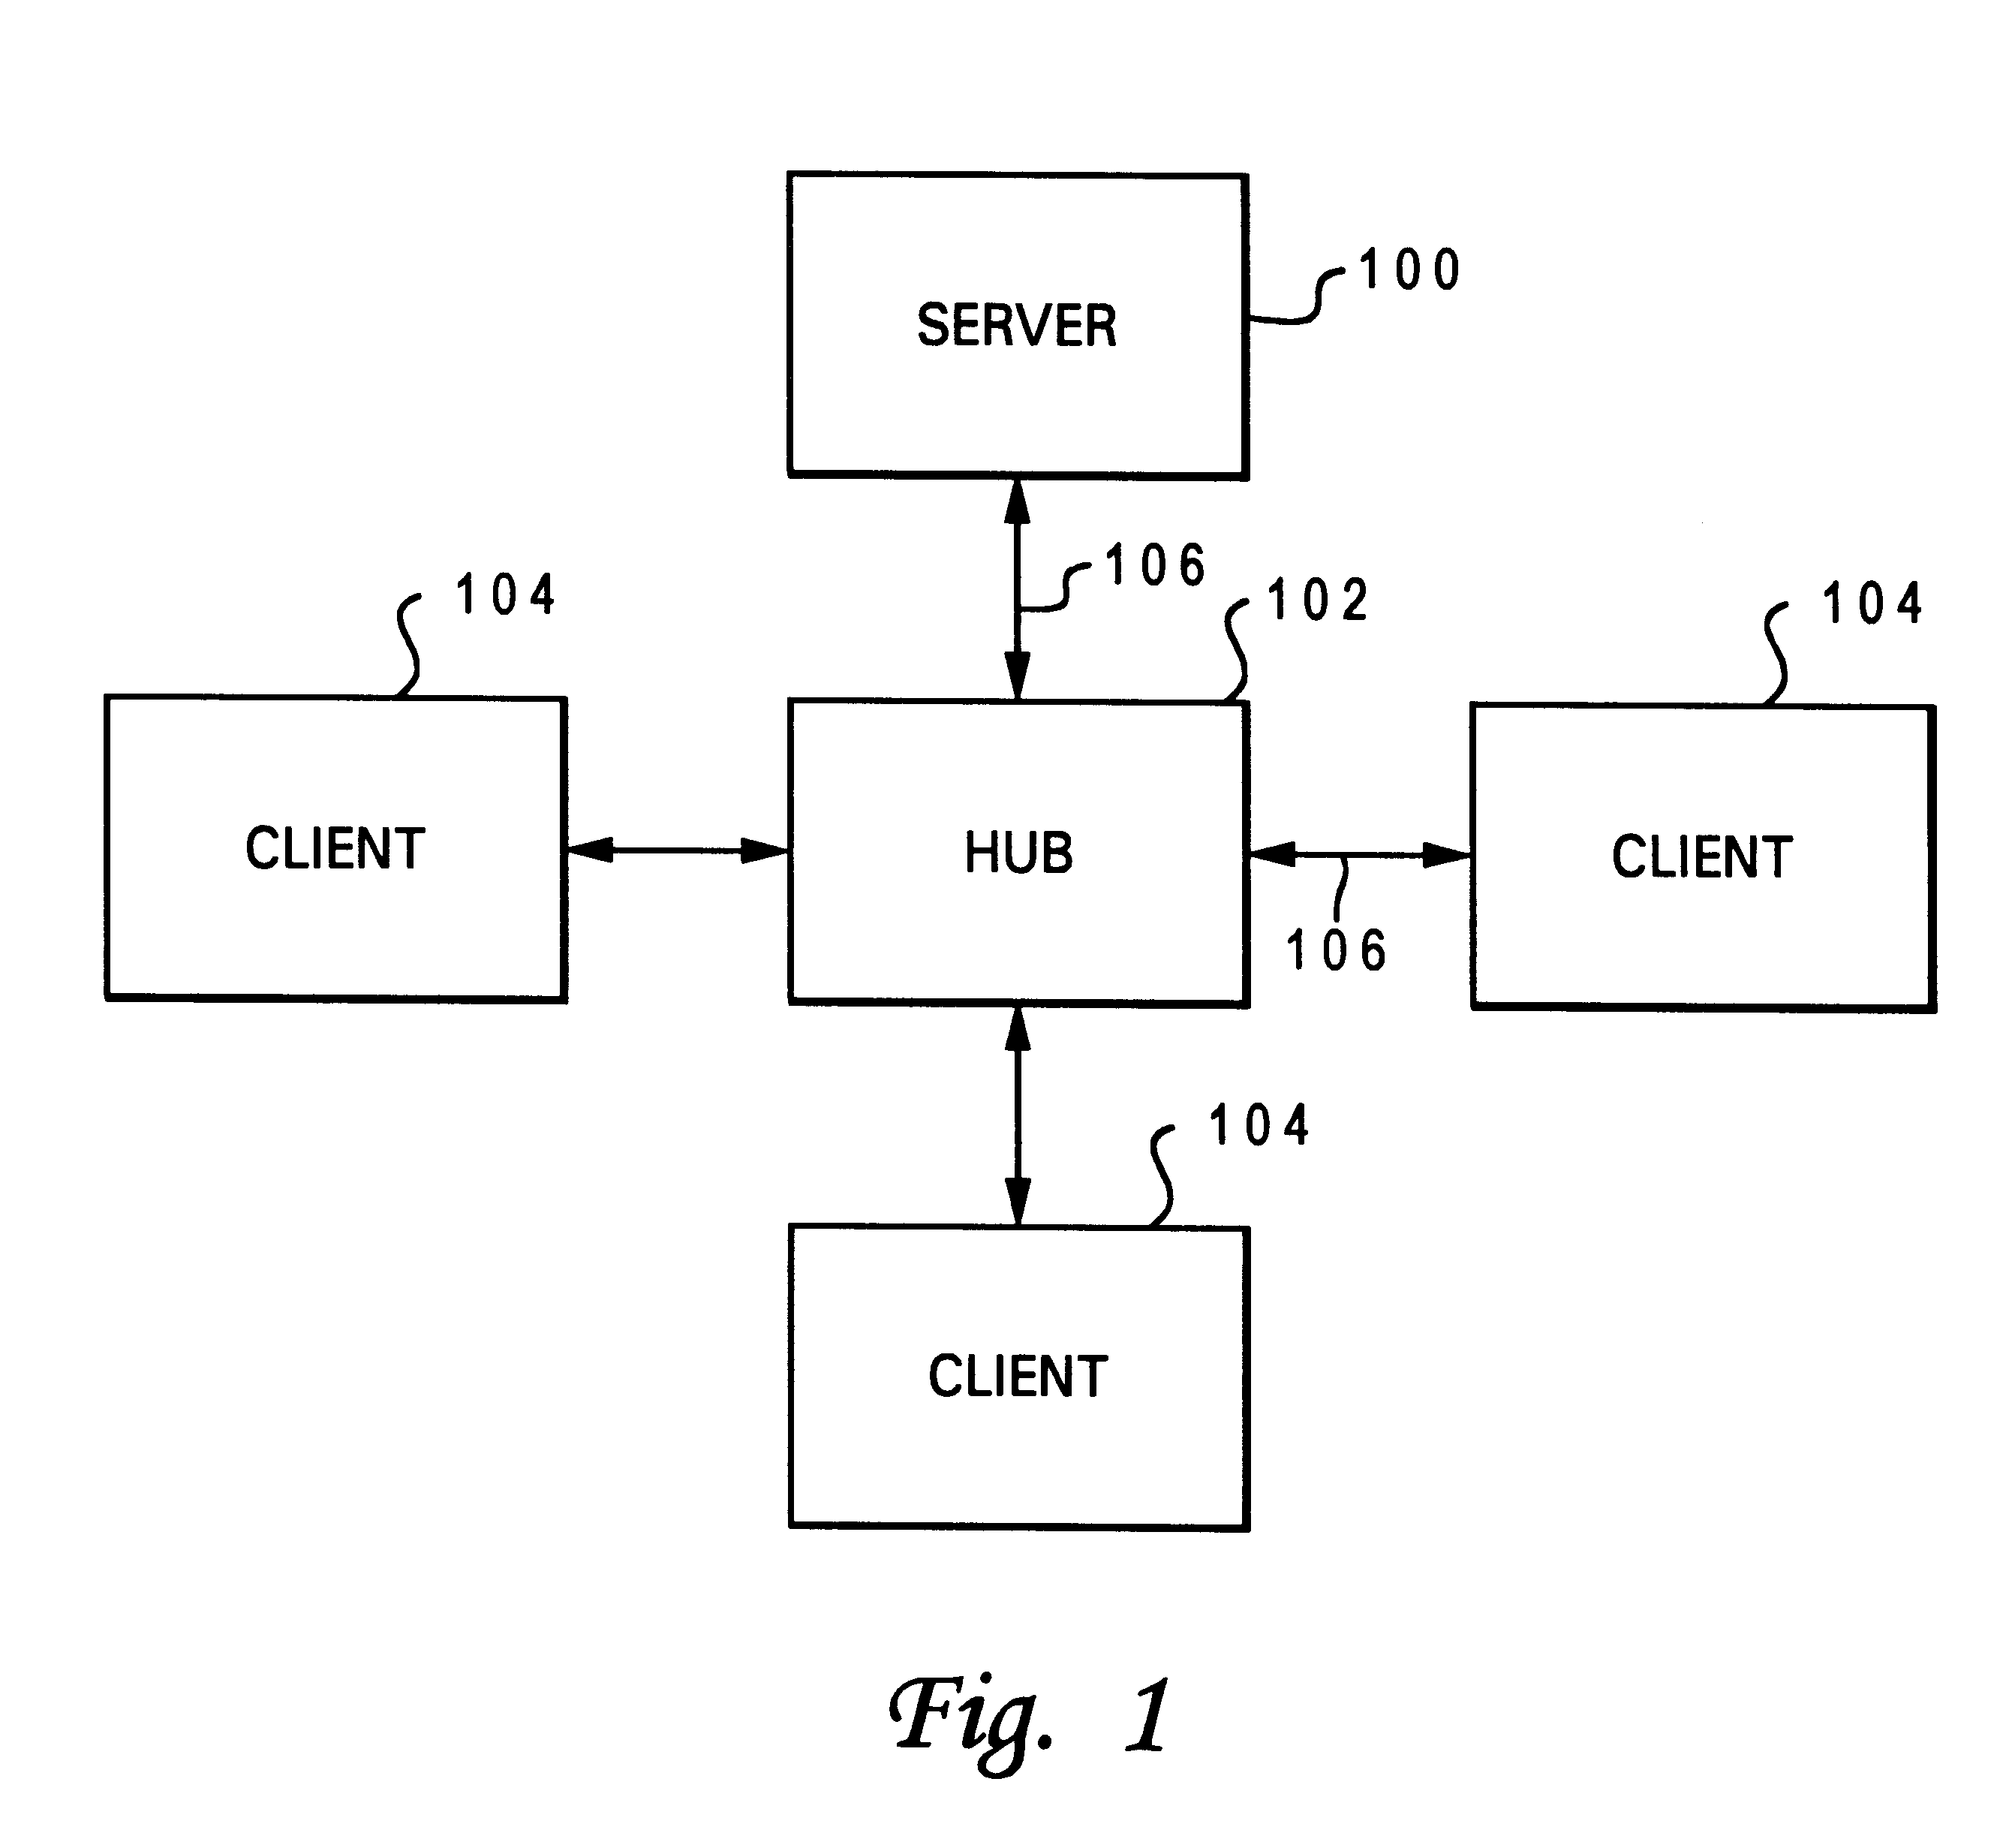 Data processing system and method for permitting a server computer system to remotely modify operation of a client computer system's network hardware